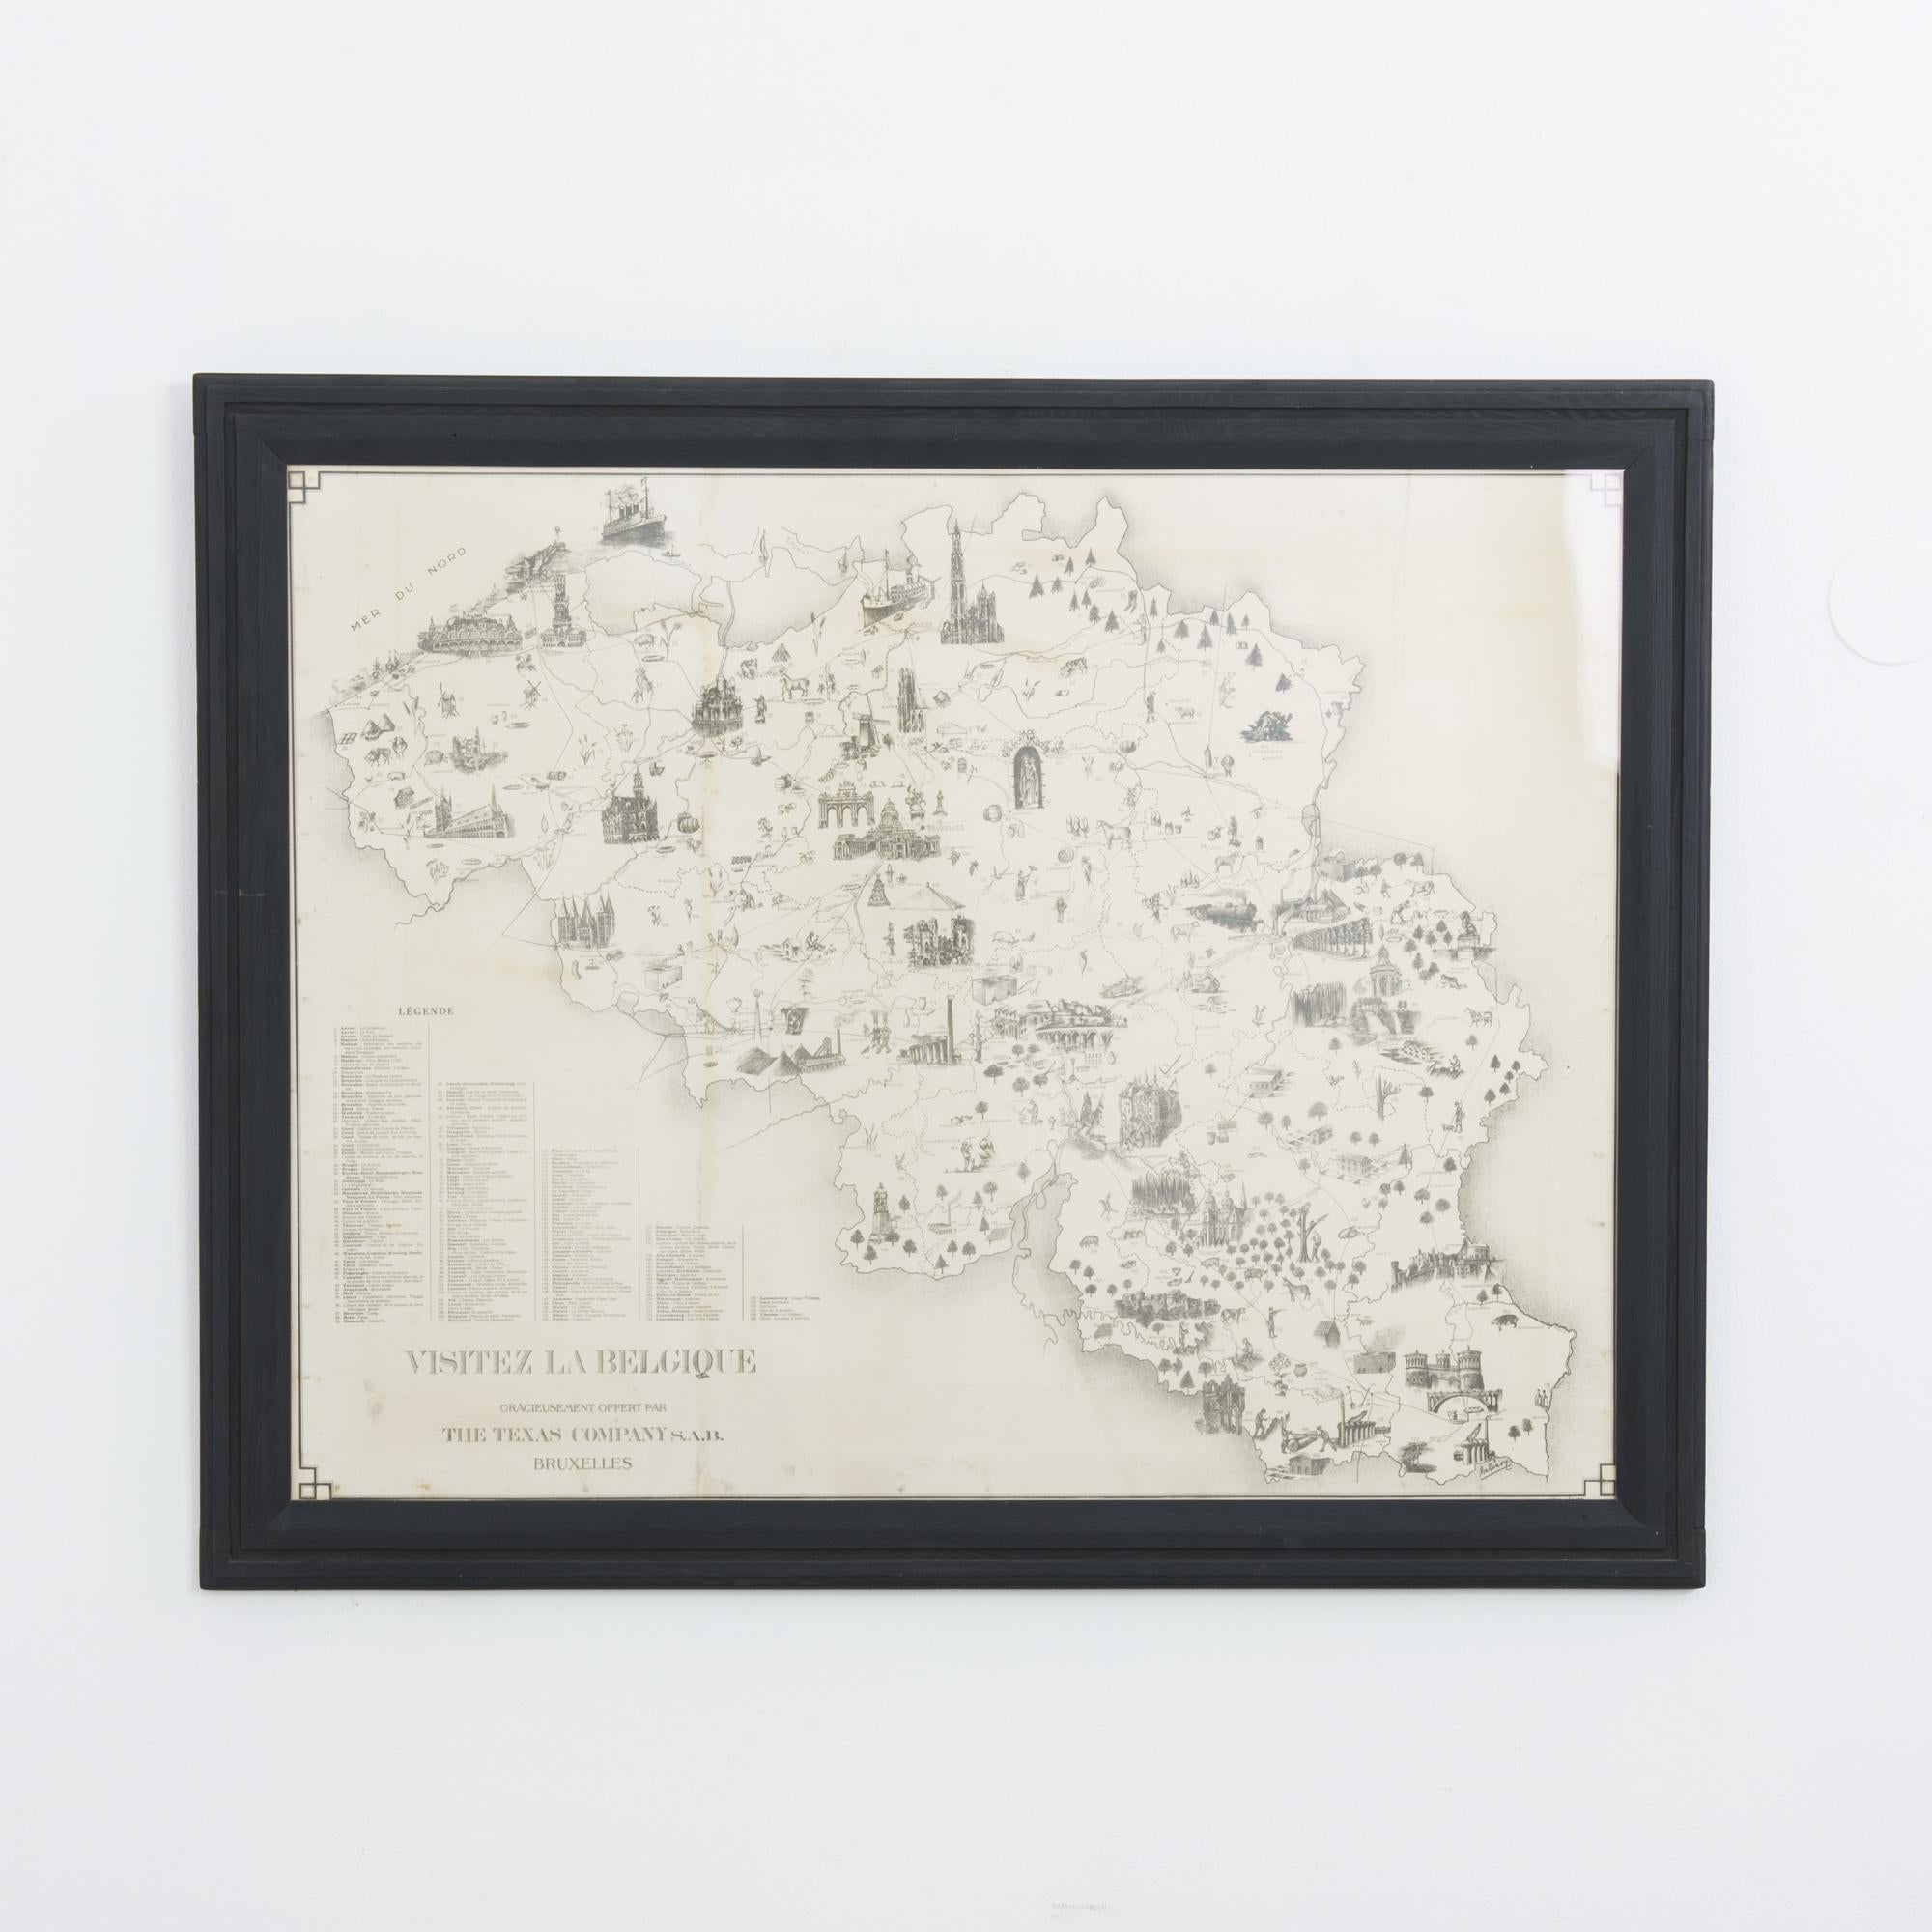 This tourist map of Belgium was made circa 1930 and is set in a matte, black frame. It was printed by the Texas Company (now known as Texaco), which expanded to Antwerp in the early twentieth century. Illustrations of tourist highlights are depicted